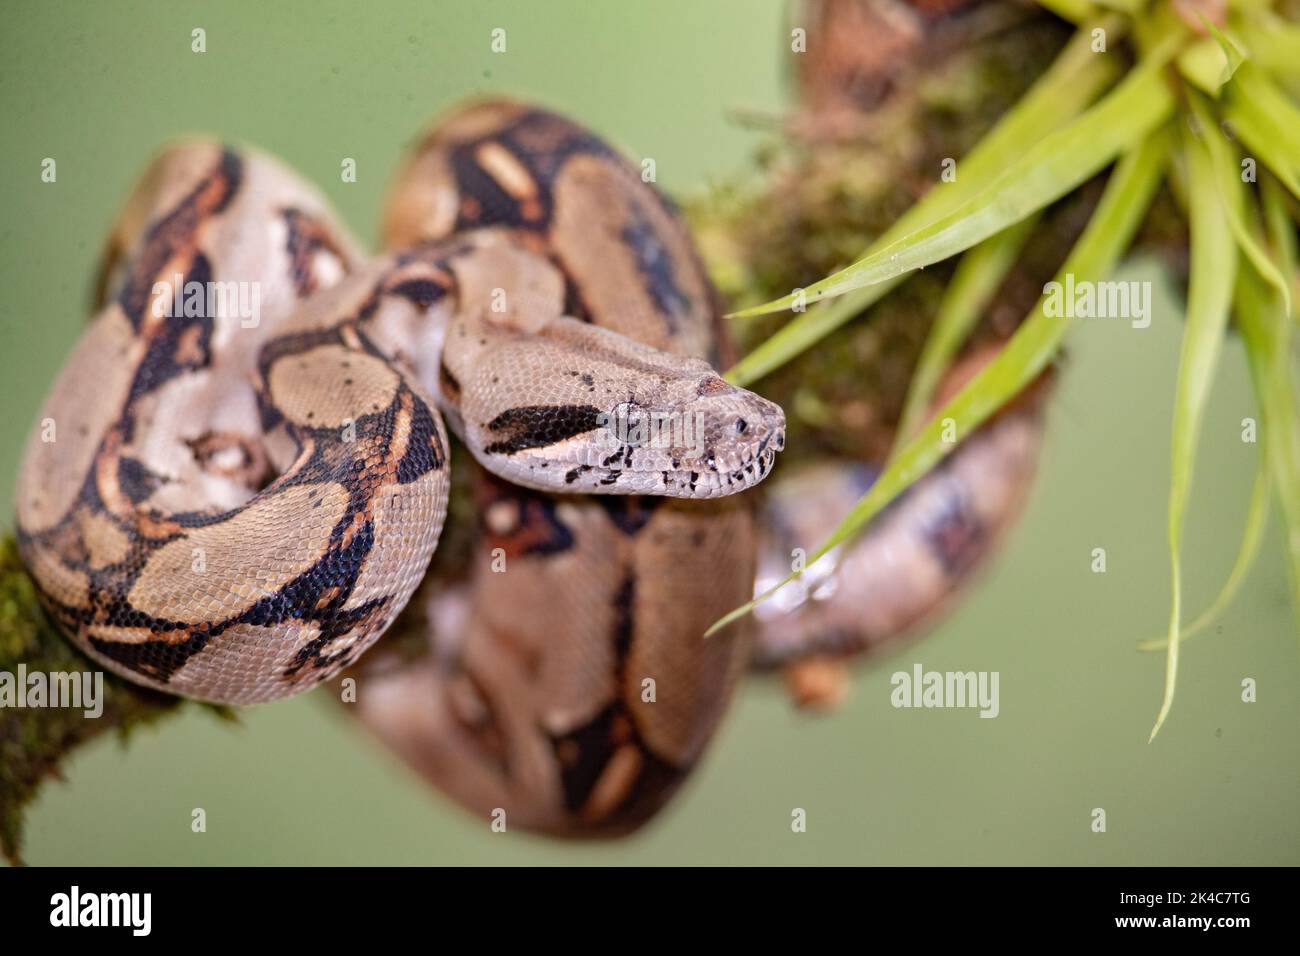 A closeup of Boa imperator snake slithering around green mosy branch on blur background Stock Photo